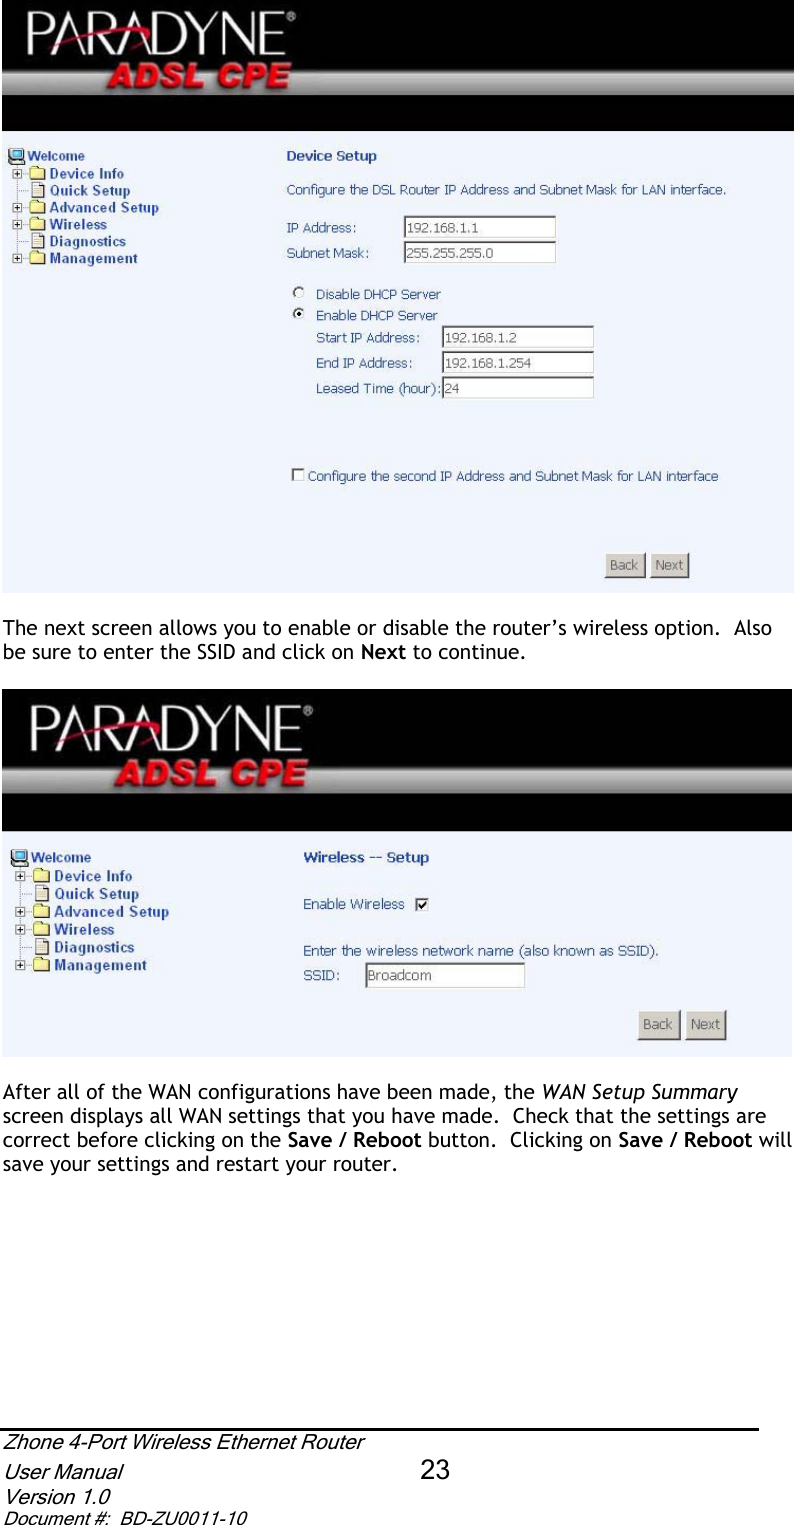 The next screen allows you to enable or disable the router’s wireless option.  Also be sure to enter the SSID and click on Next to continue. After all of the WAN configurations have been made, the WAN Setup Summaryscreen displays all WAN settings that you have made.  Check that the settings are correct before clicking on the Save / Reboot button.  Clicking on Save / Reboot will save your settings and restart your router. Zhone 4-Port Wireless Ethernet Router User Manual 23Version 1.0 Document #:  BD-ZU0011-10